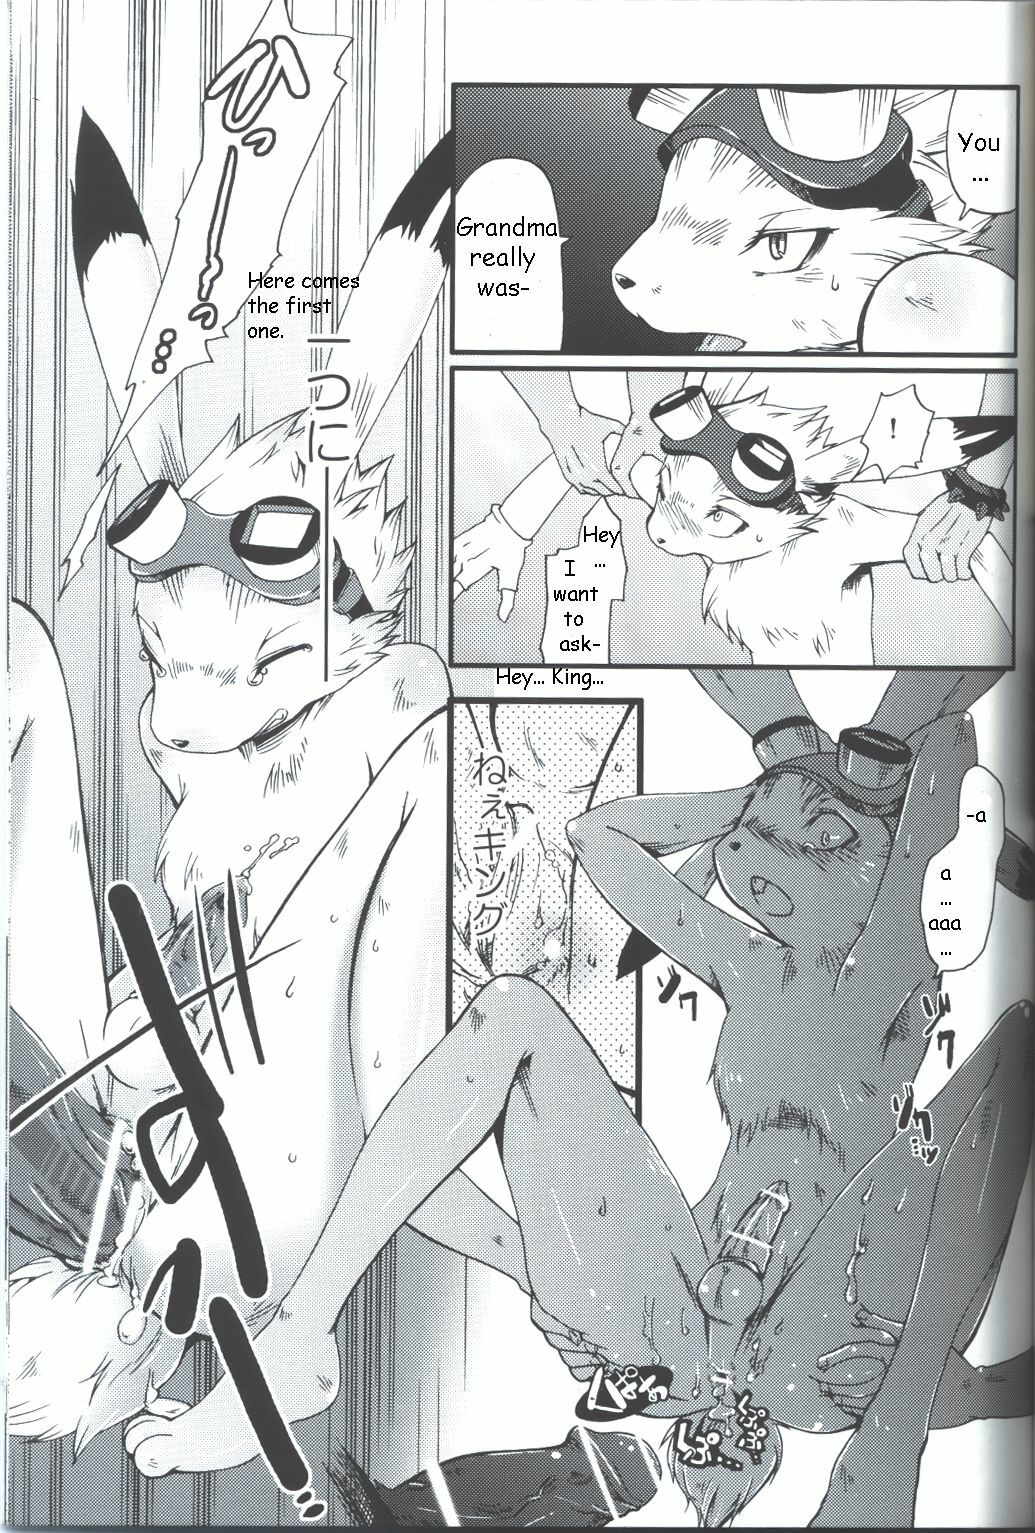 [Dogear (Inumimi Moeta)] Requirements of the King (Summer Wars) [English] page 13 full